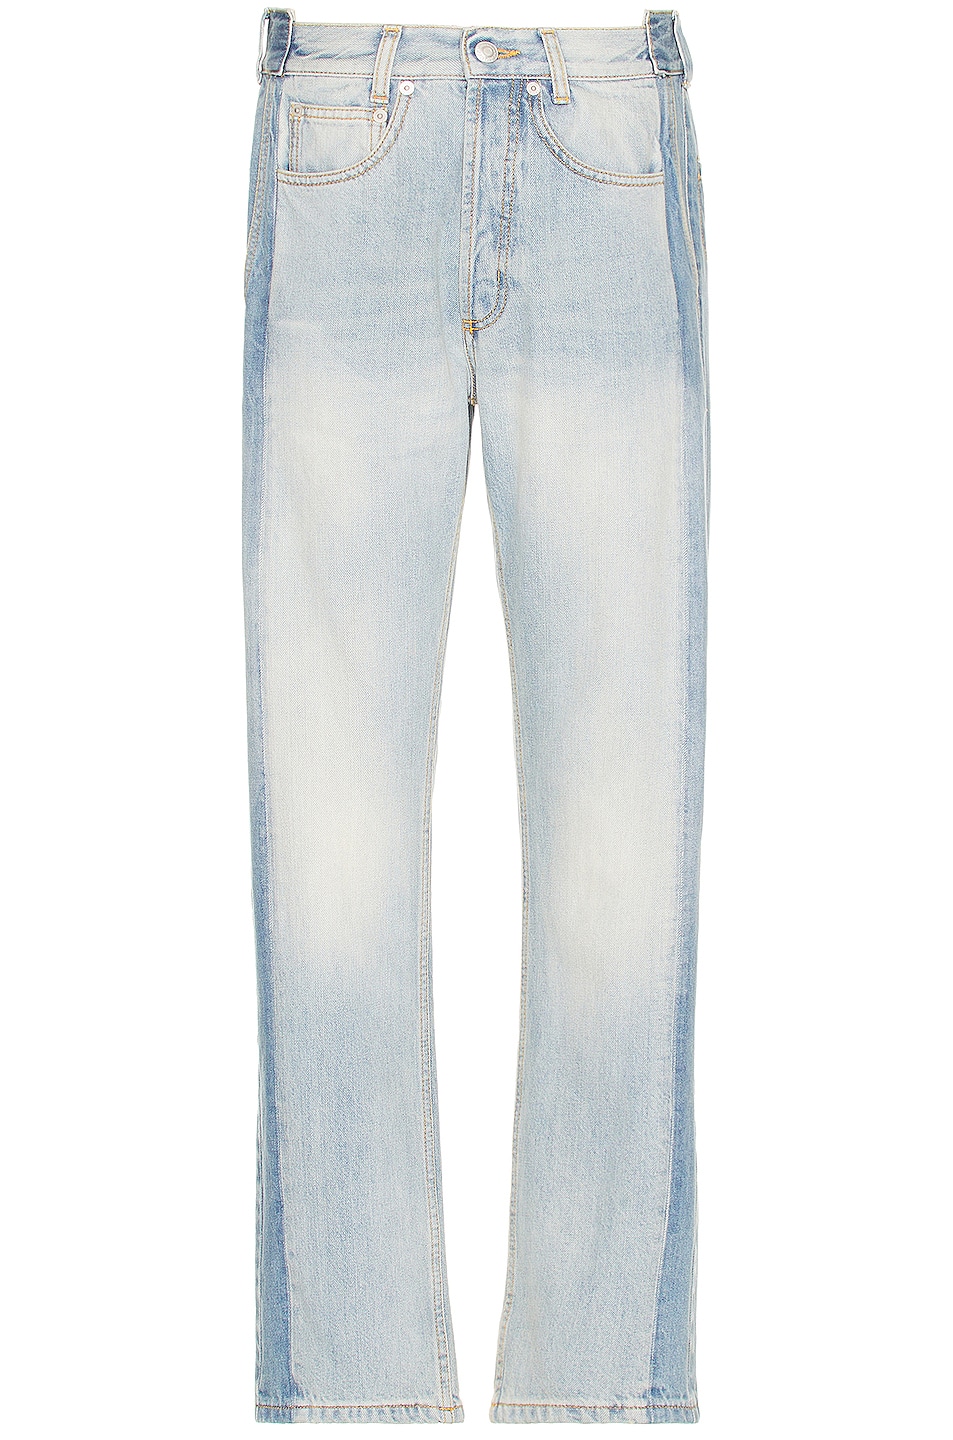 Image 1 of Alexander McQueen Worker Patched Slim Jean in Light Blue Washed